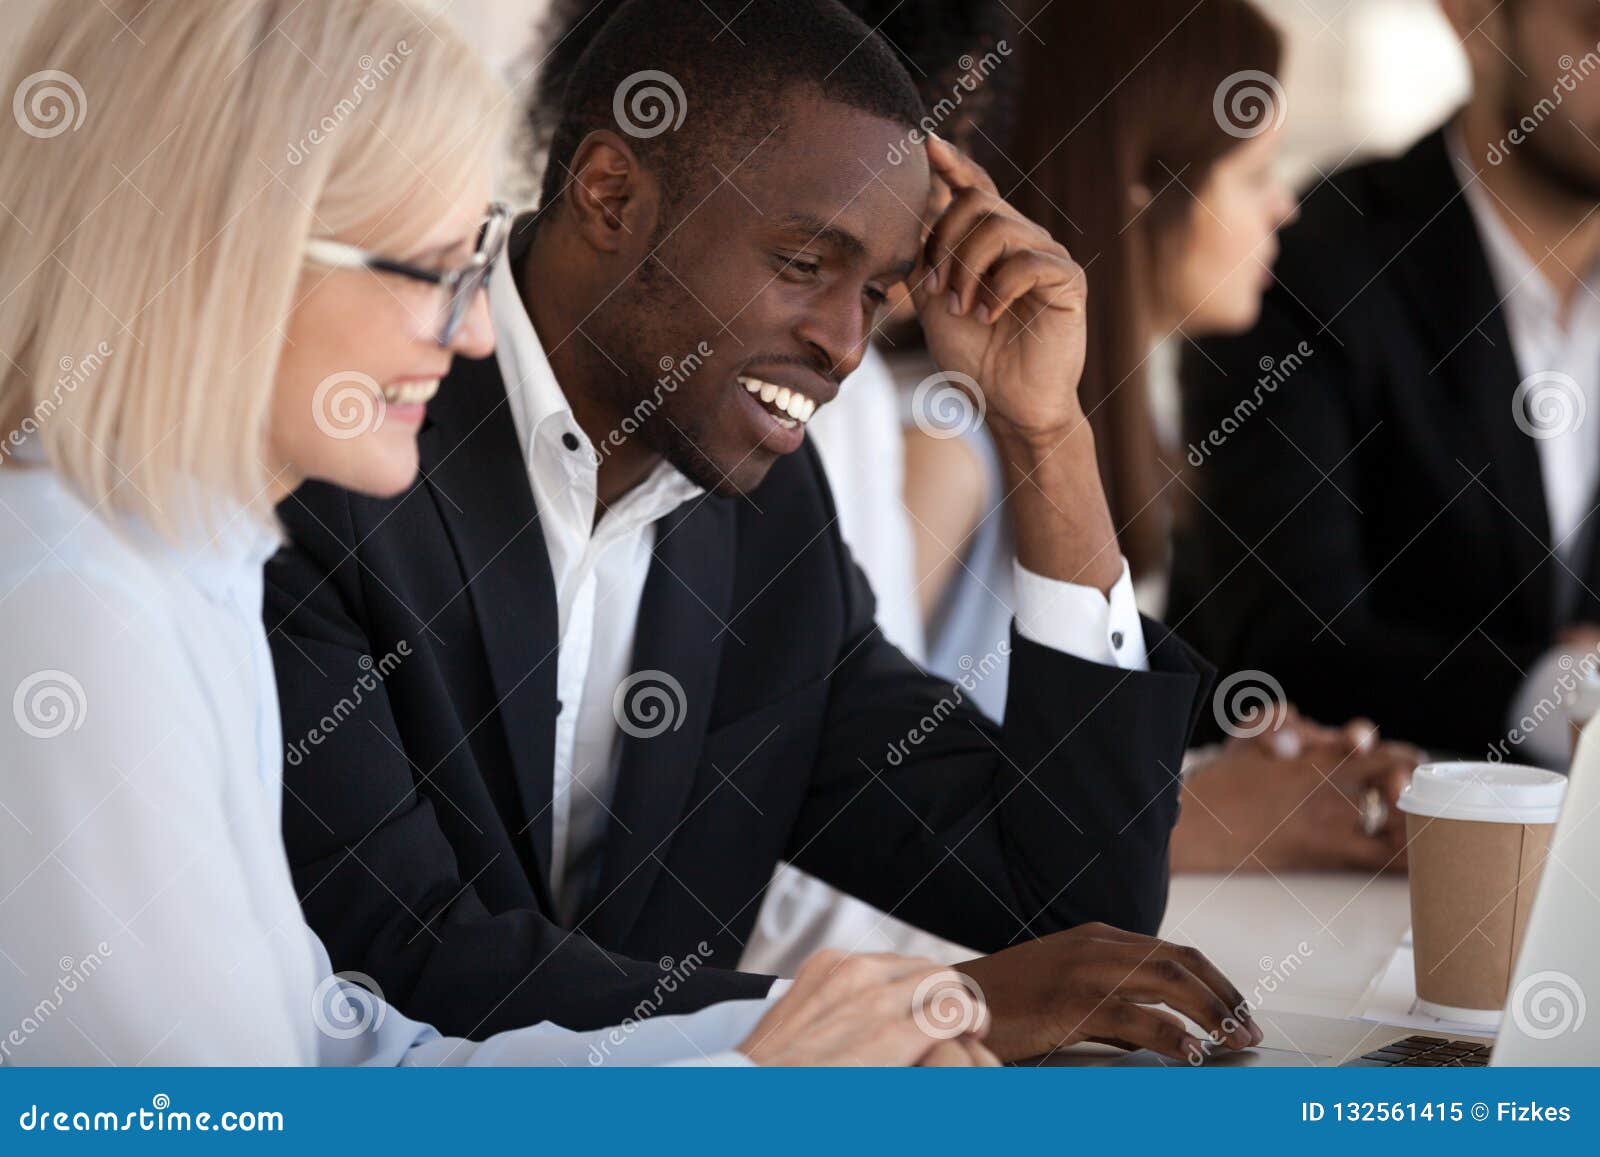 smiling multi-ethnic coworkers working together in office using